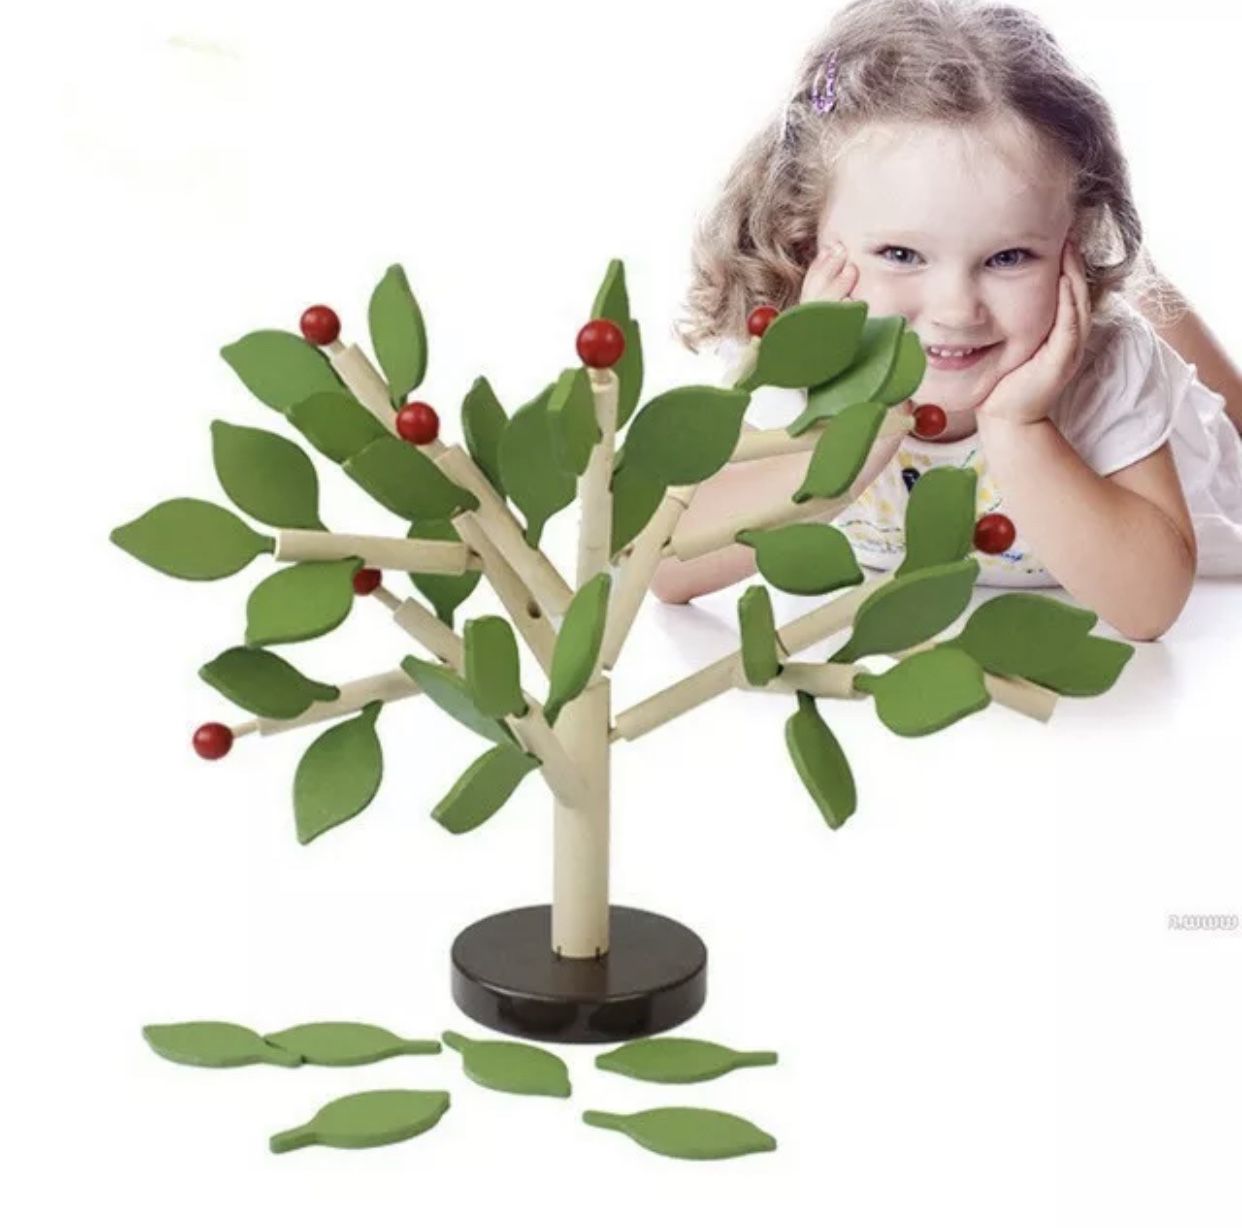 Wooden Tree Puzzle Toy Assemble Leaves Inserted Educational Toy Montessori